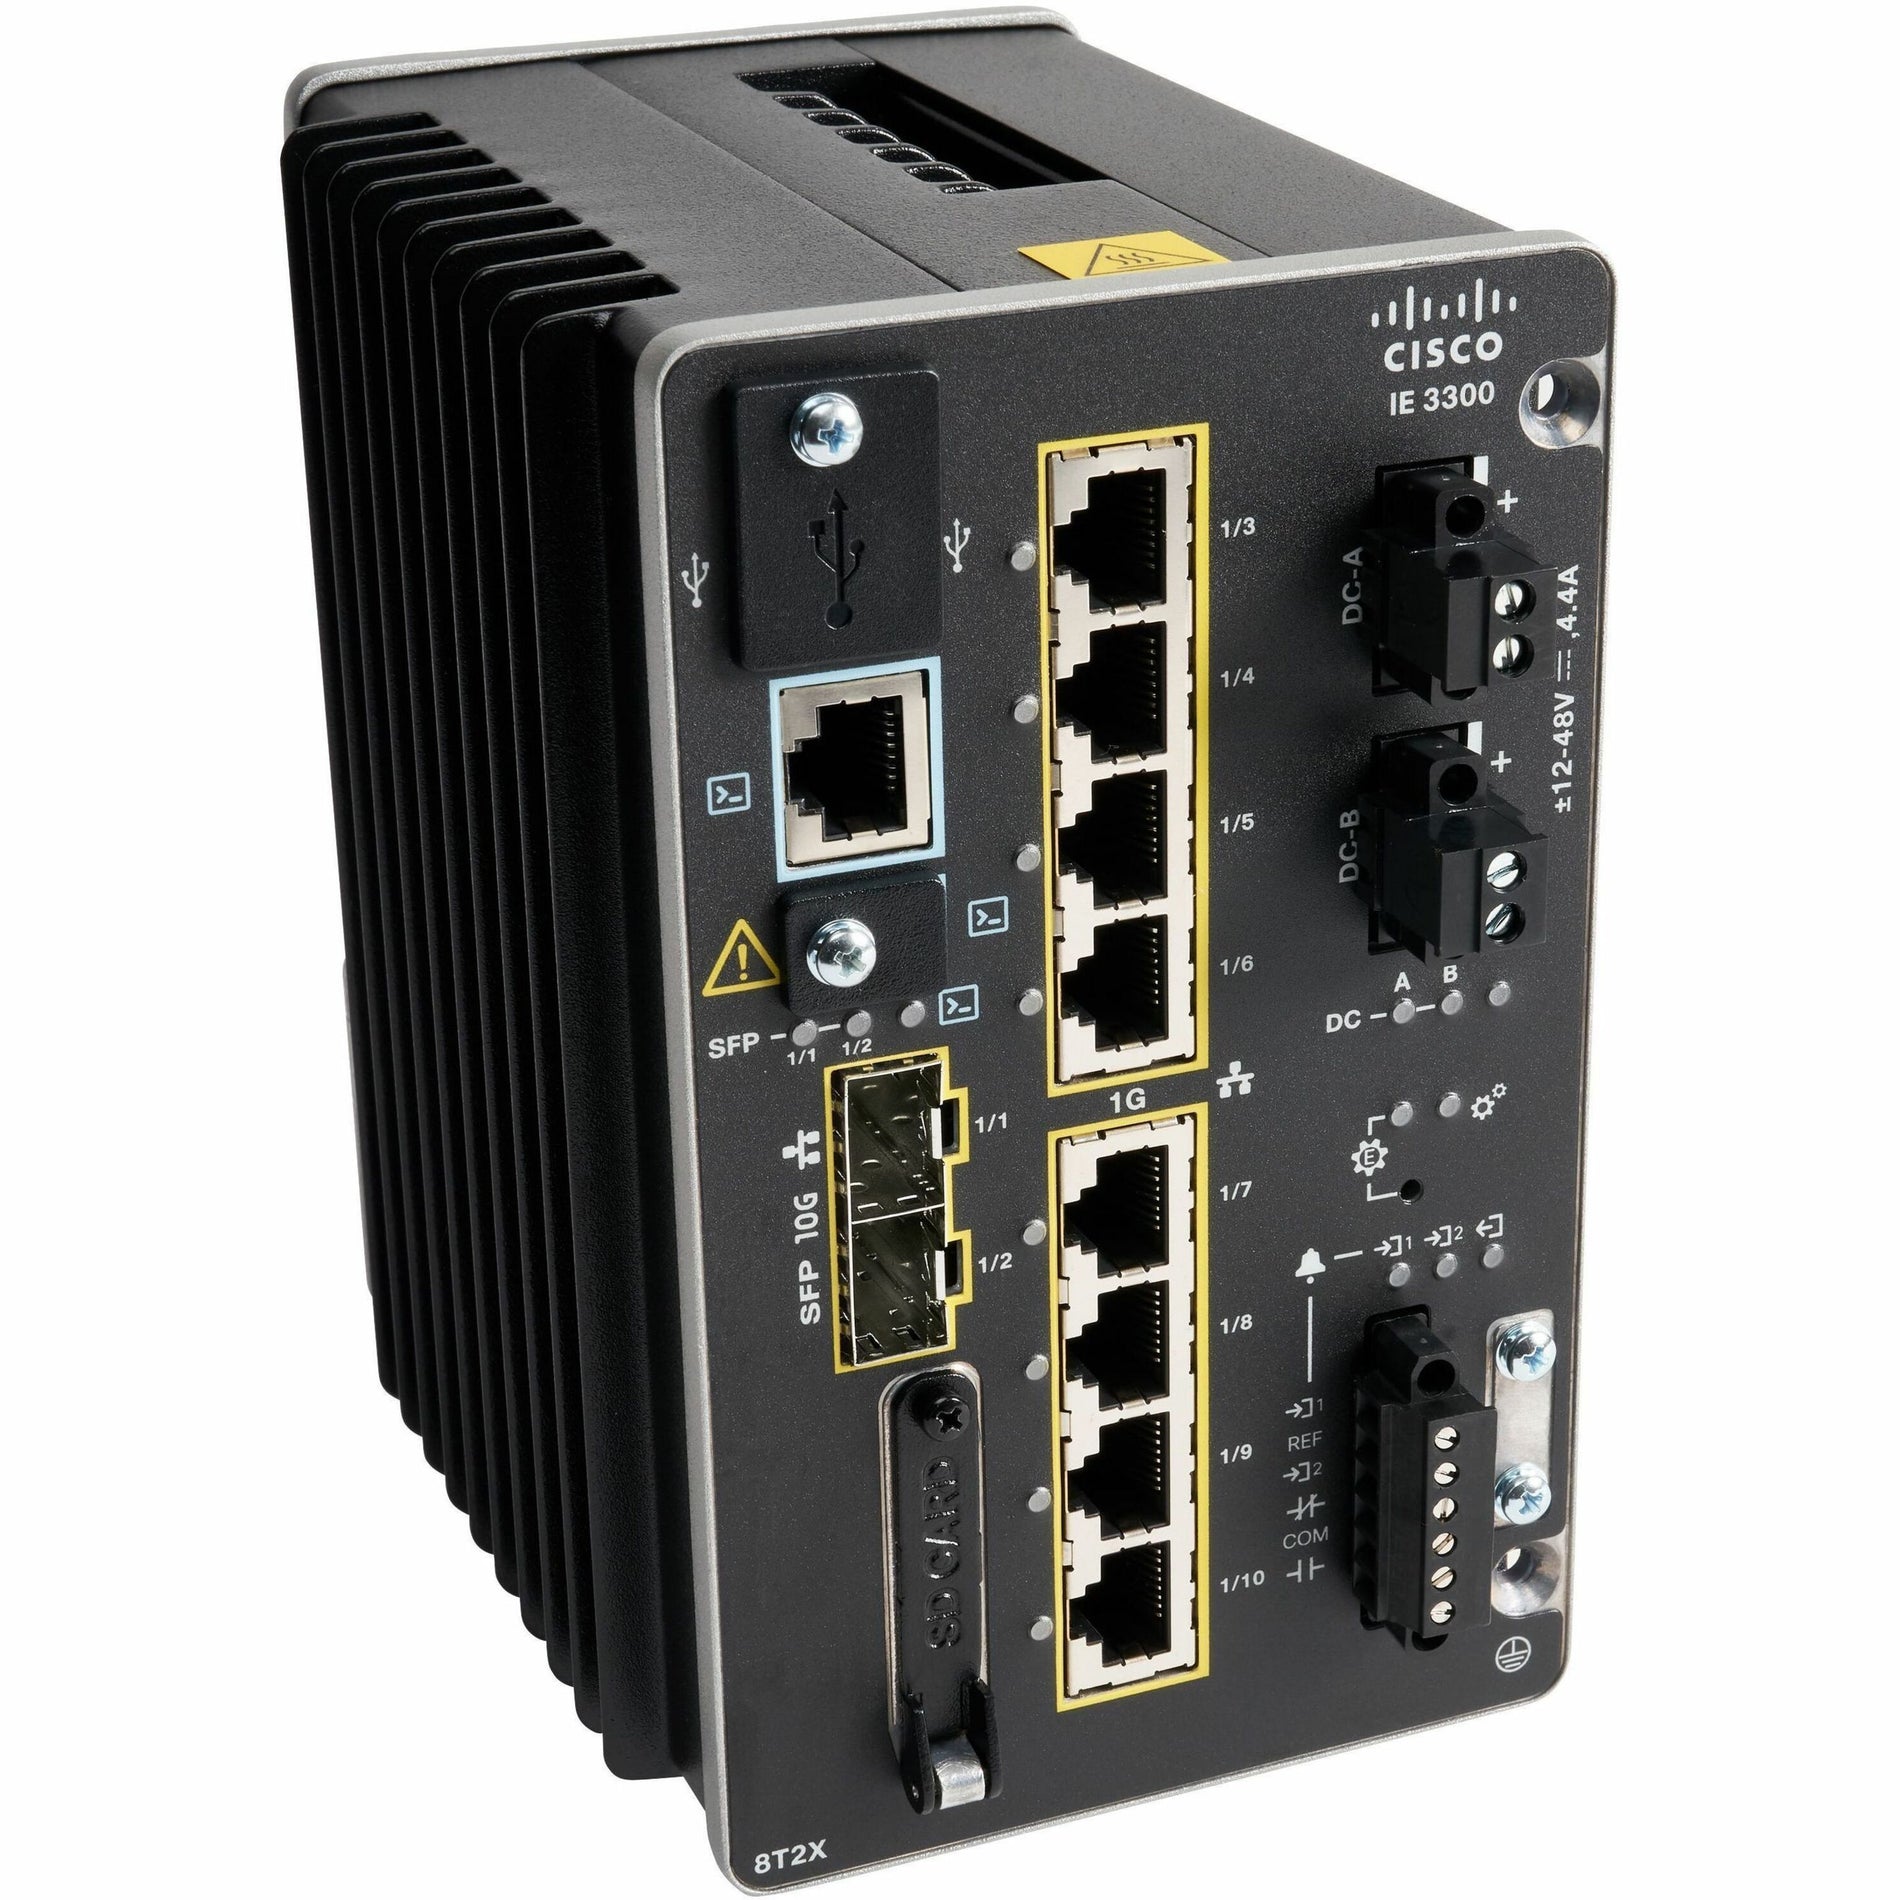 Cisco Catalyst IE-3300-8T2S Rugged Switch (IE-3300-8T2S-E)